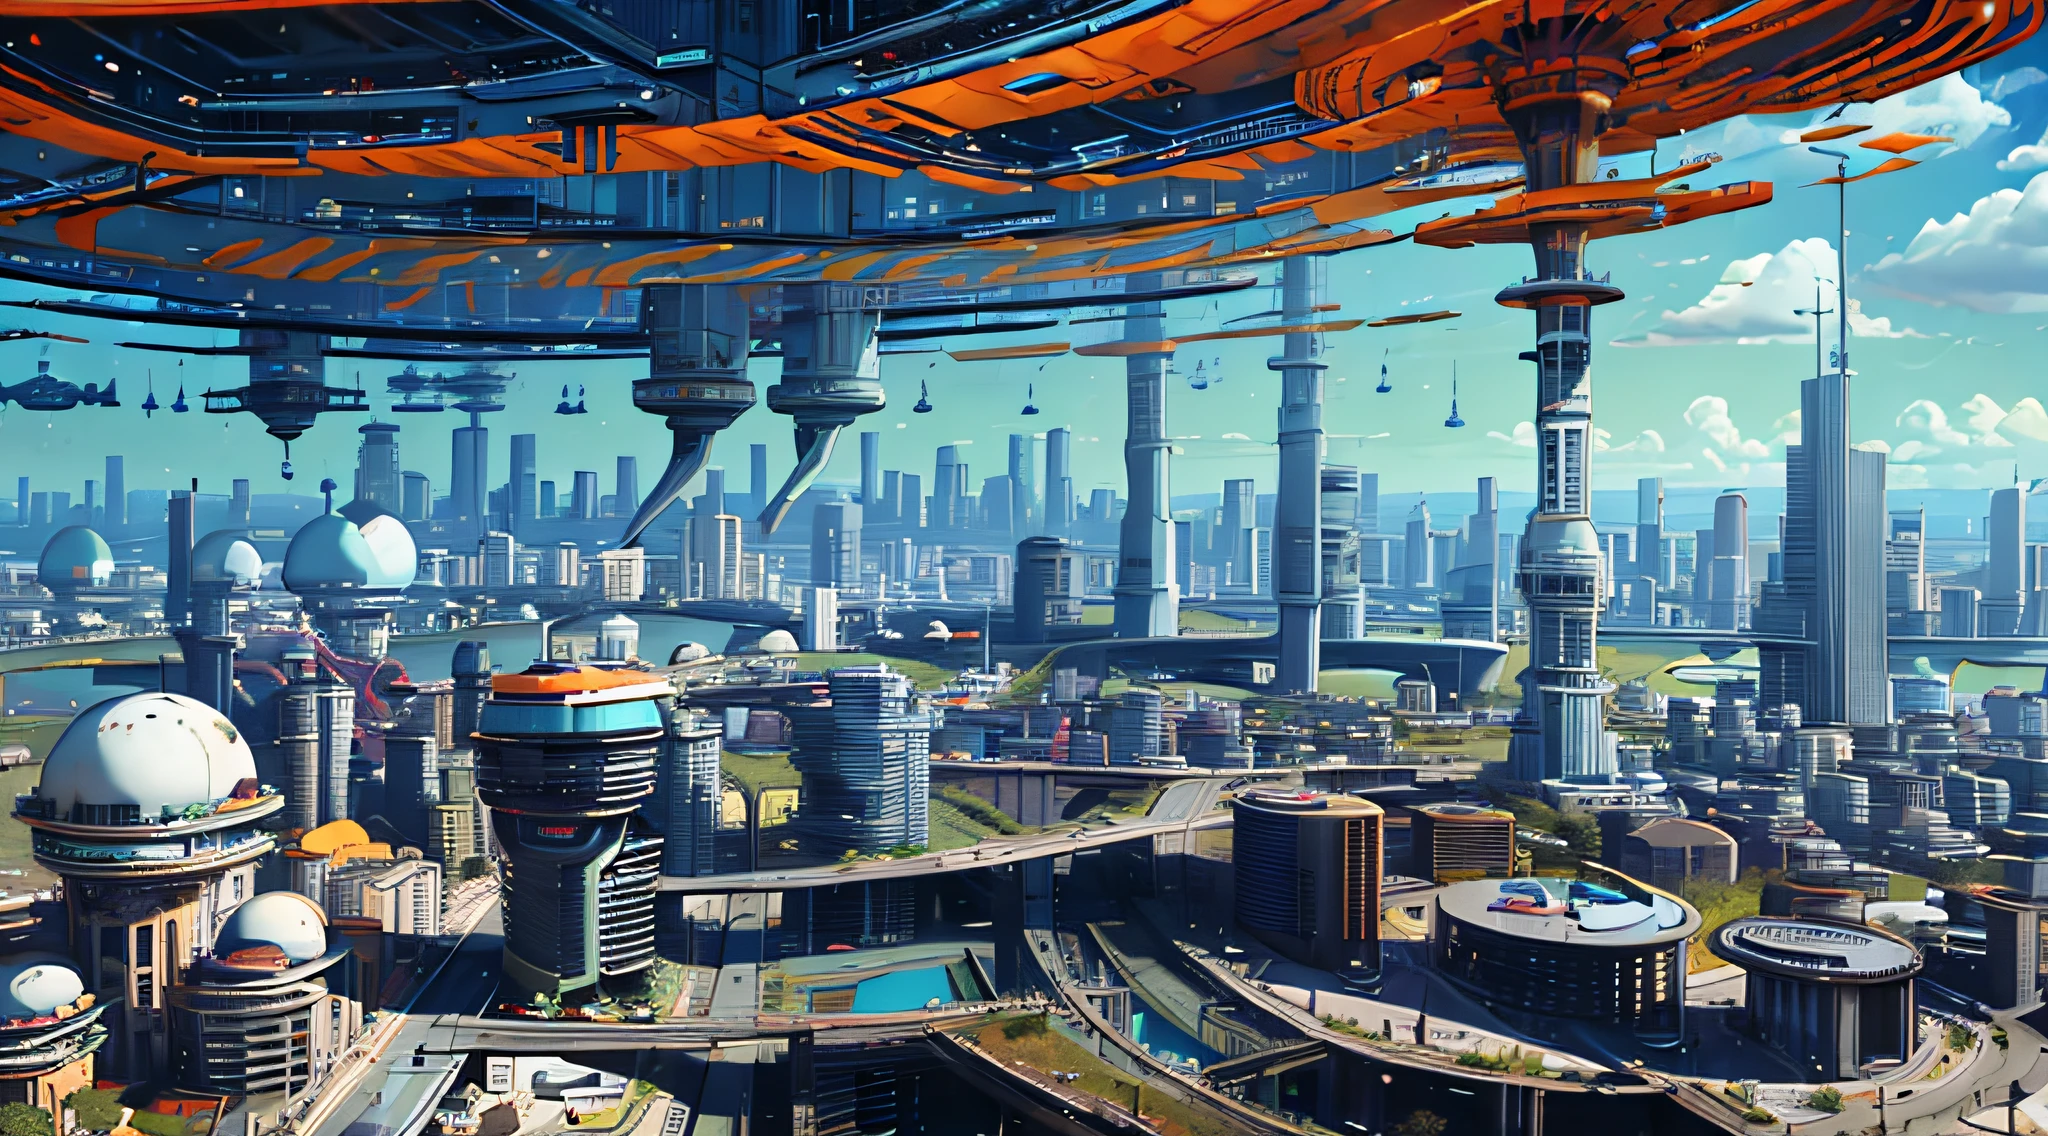 PANORAMIC  scenery, drone view, ELITE PROFESSIONAL ARCHITECTURAL RENDERING, PROJECT PRESENTATION, TRENDY CYBER HIGH-RISE BUILDING, 120-STOREY SUPER-STRUCTURE, CYBER DESIGN, ZAHA HADID SYTLE , LOCATE AT CENTER OF TOKYO, TOKYO SKYTREE TOWER AT BACKGROUND, well WEATHER, SUNNY DAY, sky, clouds, space ships, fighter jets